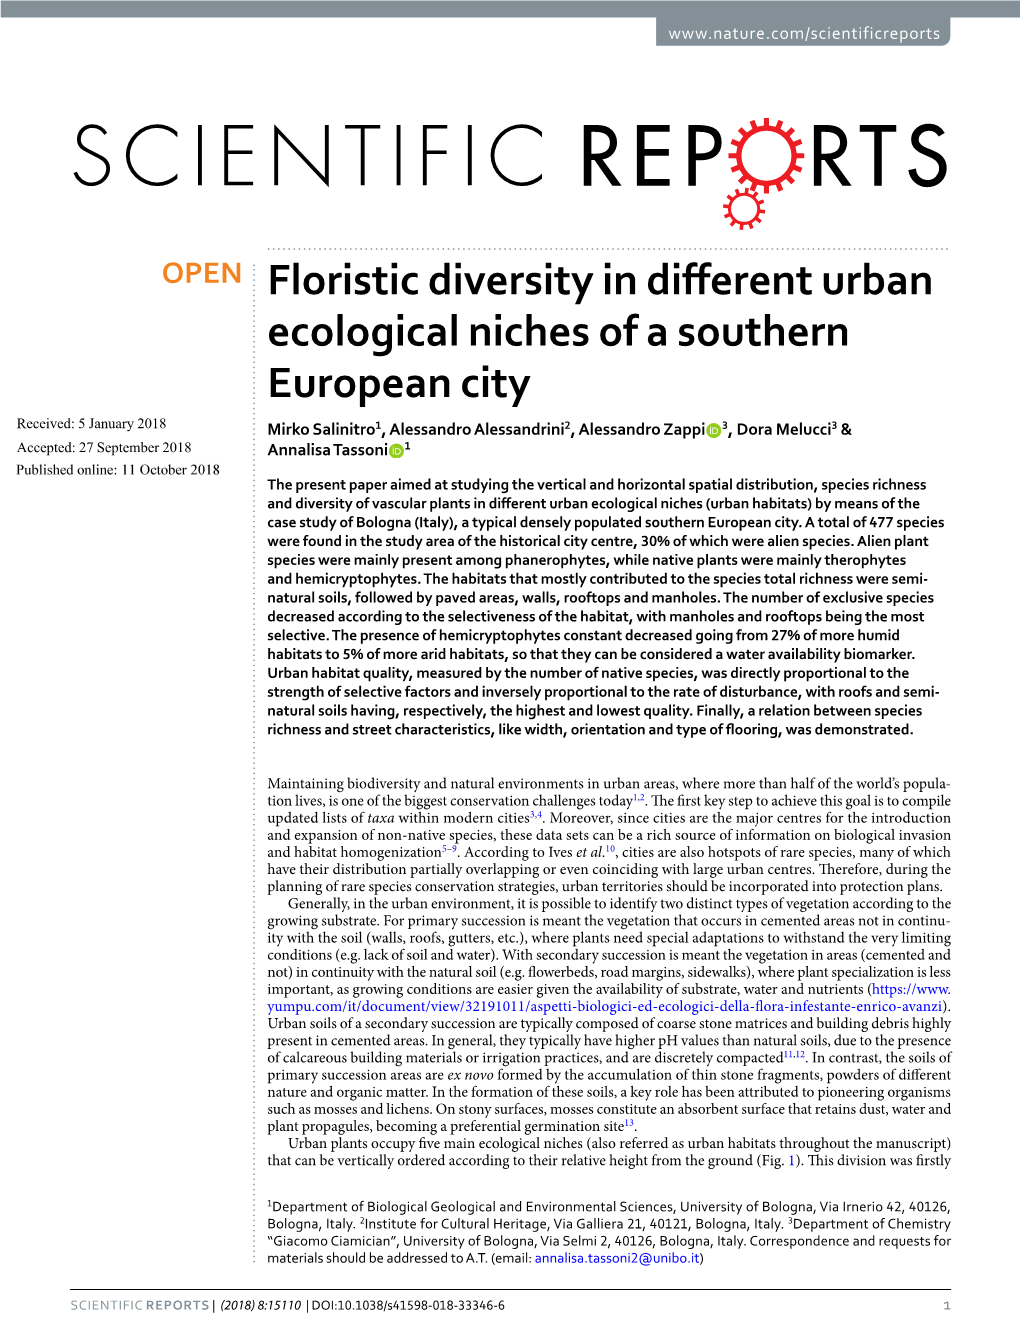 Floristic Diversity in Different Urban Ecological Niches of a Southern